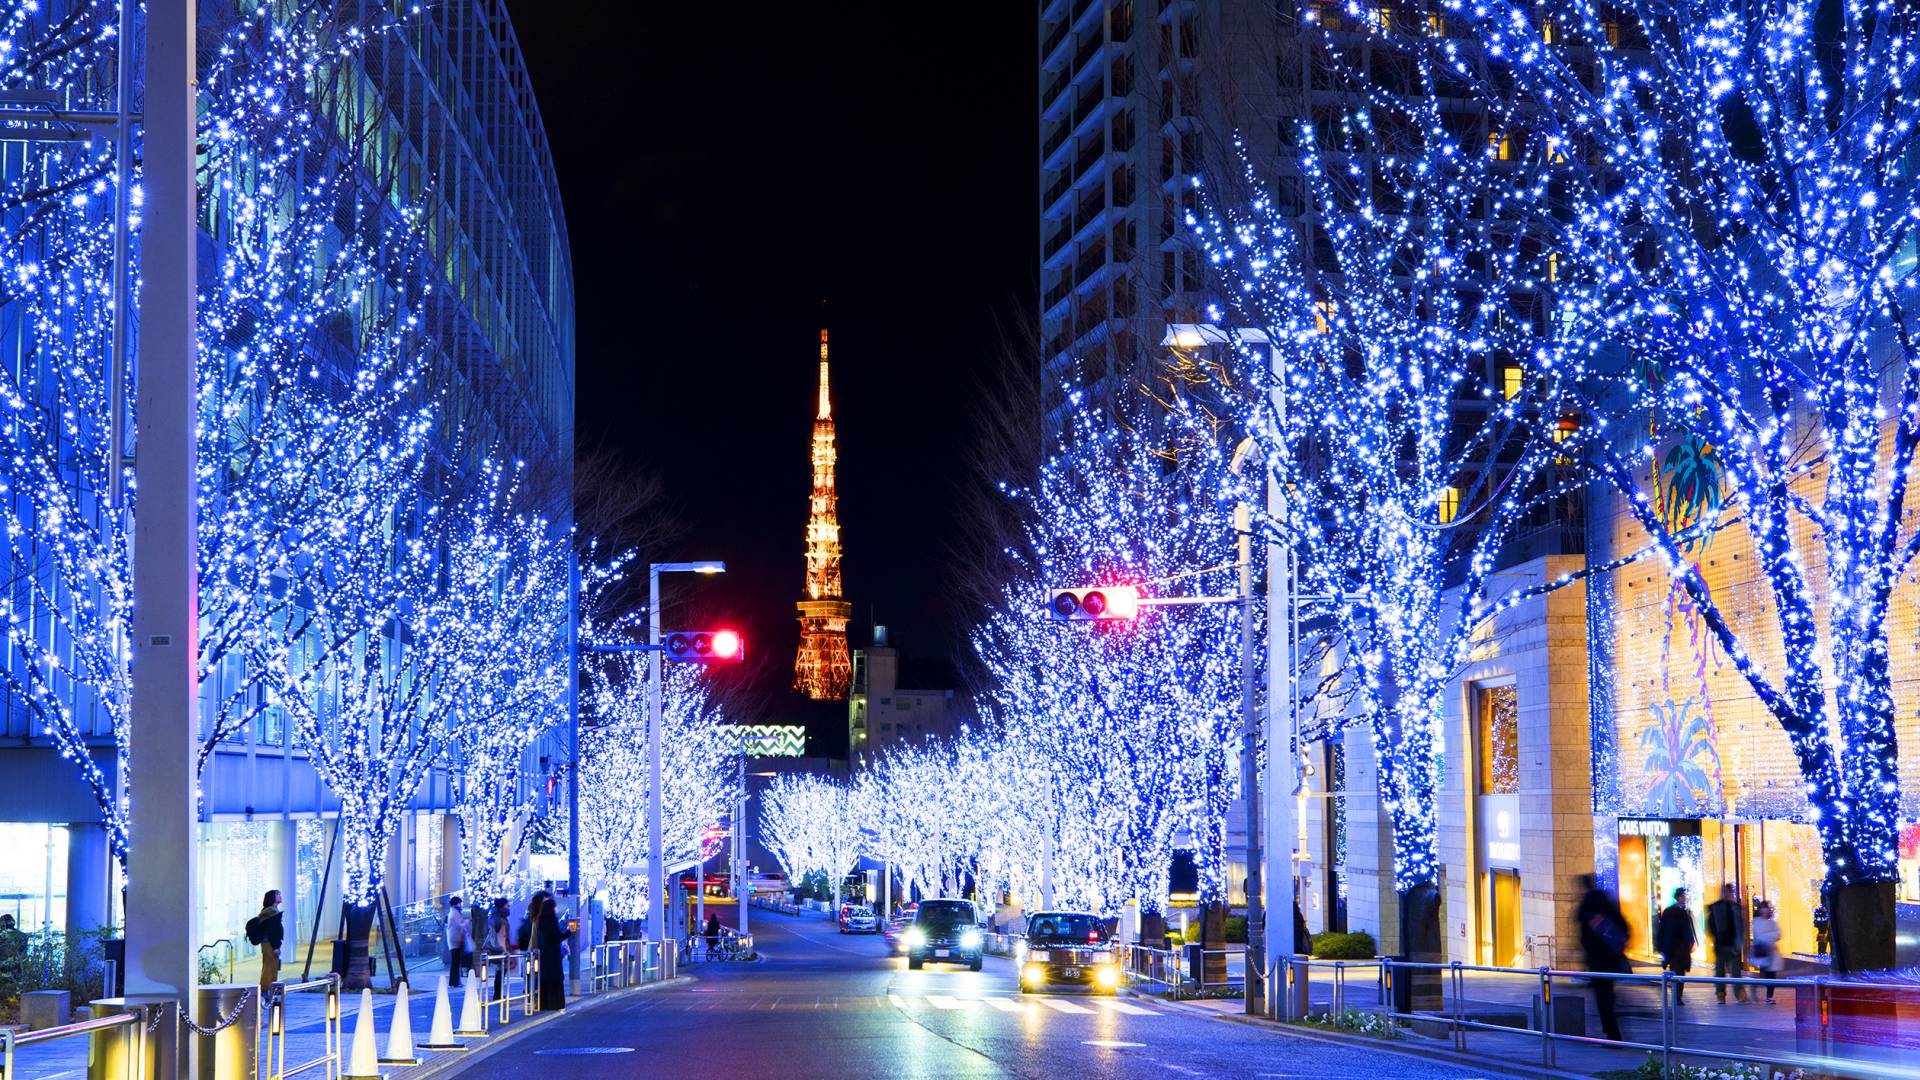 Winter Sightseeing in Tokyo Done Right: What to Know and What to